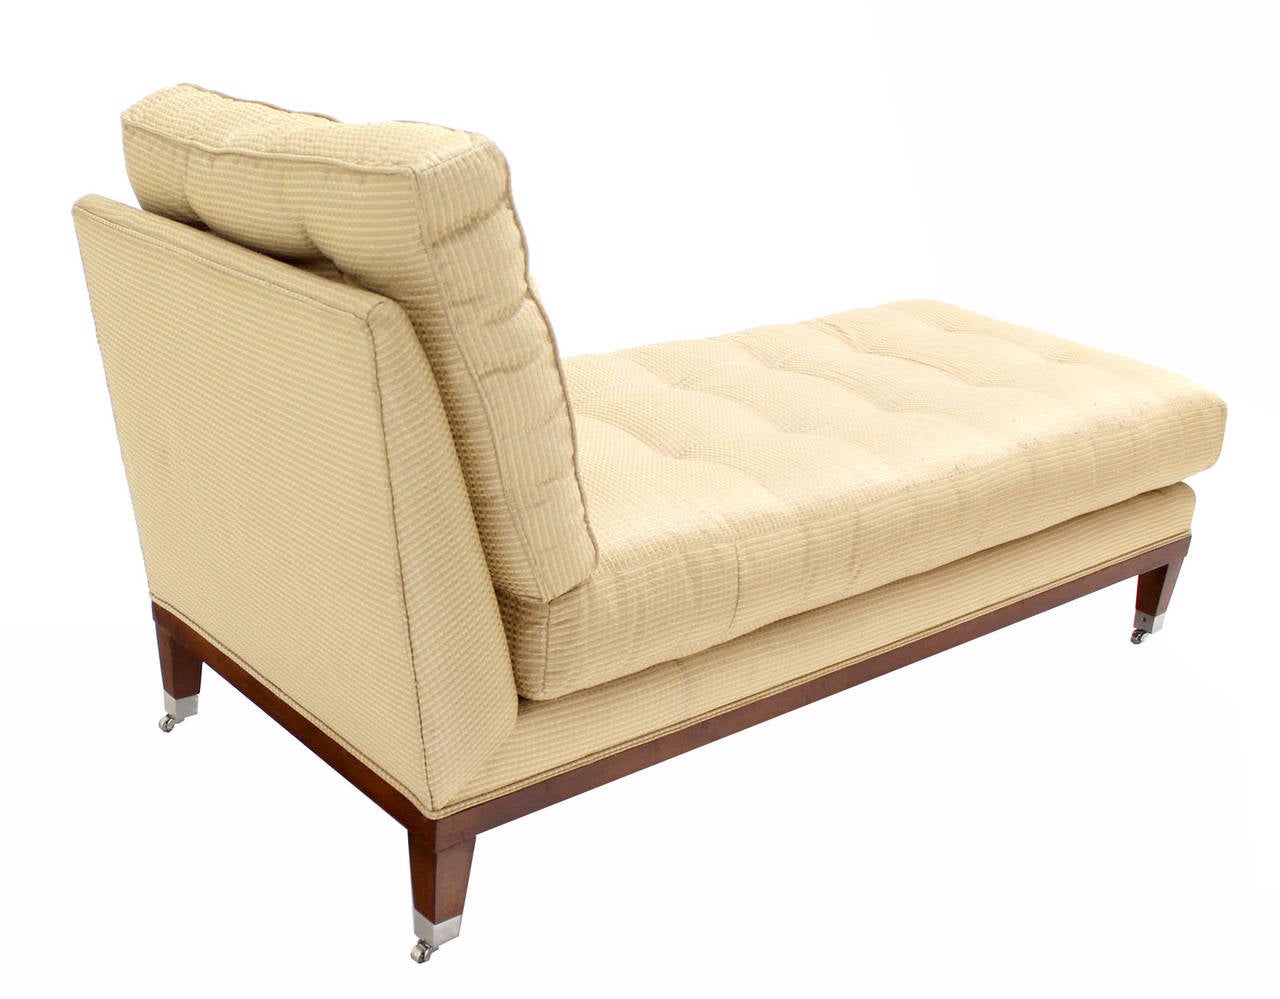 Very comfortable modern style chaise longue.